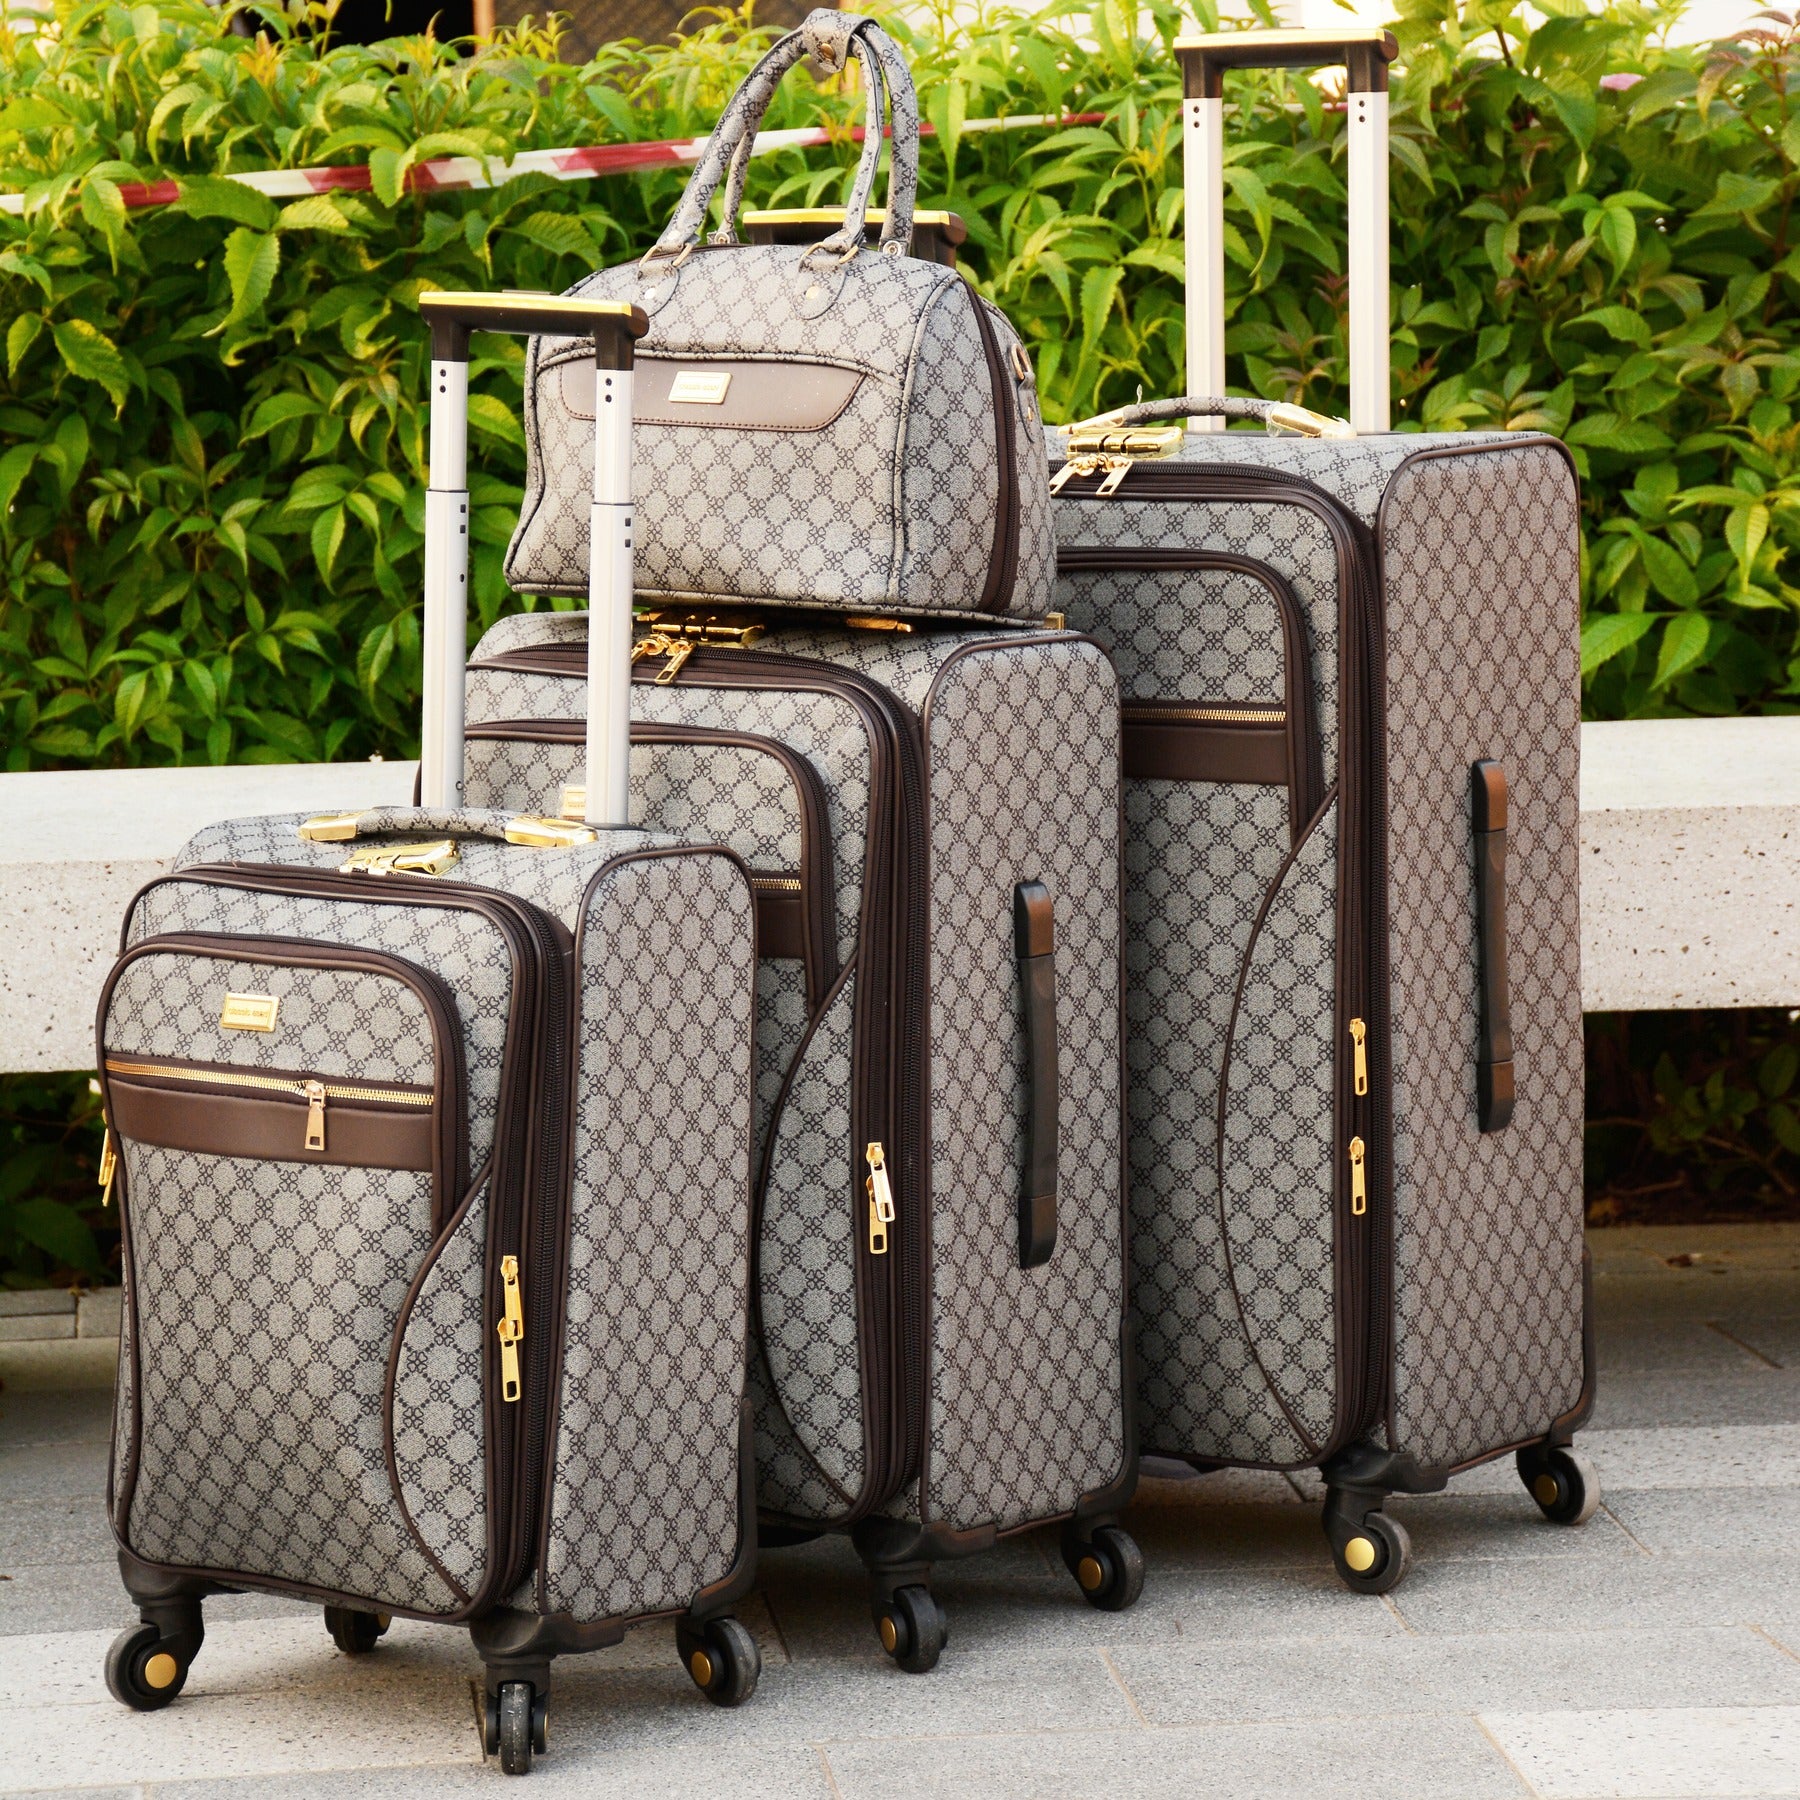 VL PU Leather Material Luggage | 4 Pcs Full Set Soft shell Four Wheel Trolley Bag